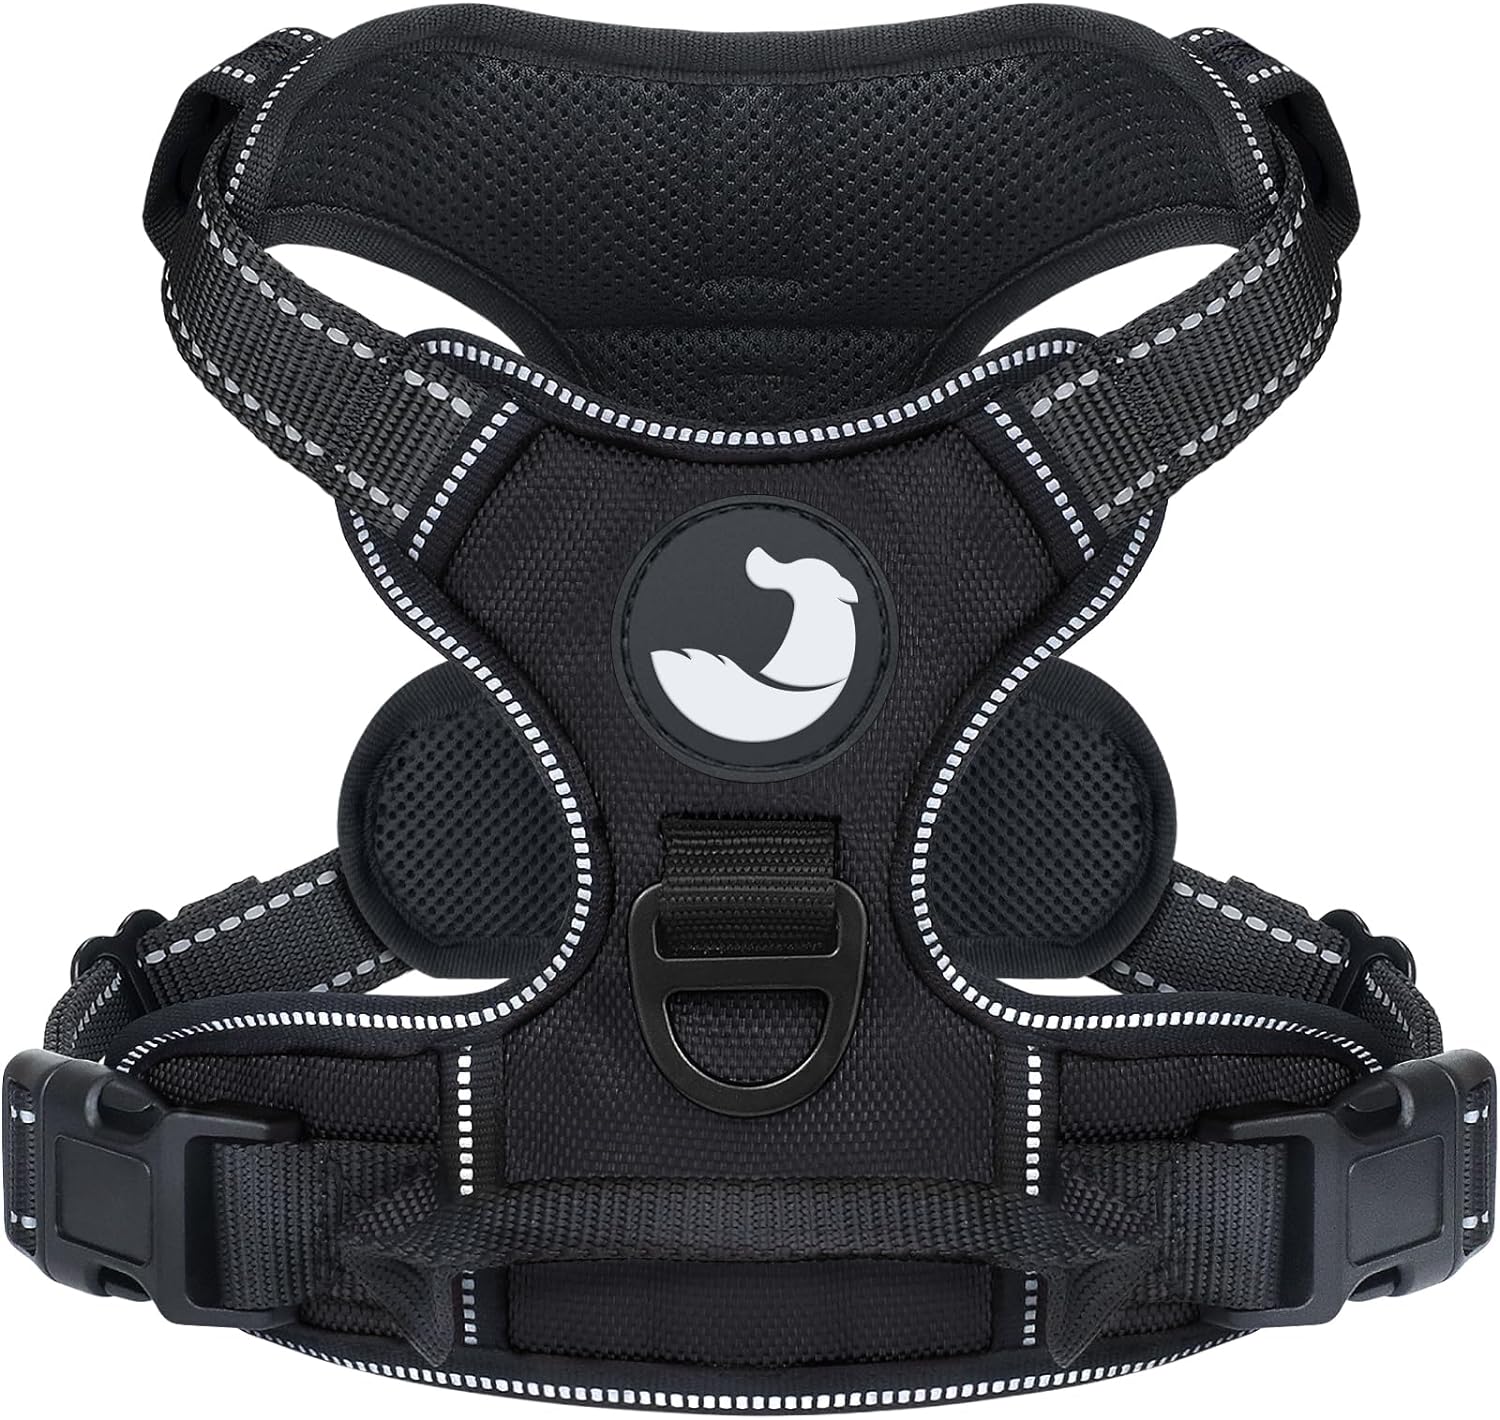 Joytale No Pull Dog Harness Medium Sized Dog, Reflective Pet Vest with Front Clip, Adjustable Soft Padded Harnesses with Easy Control Handle for Training and Walking, Black, M